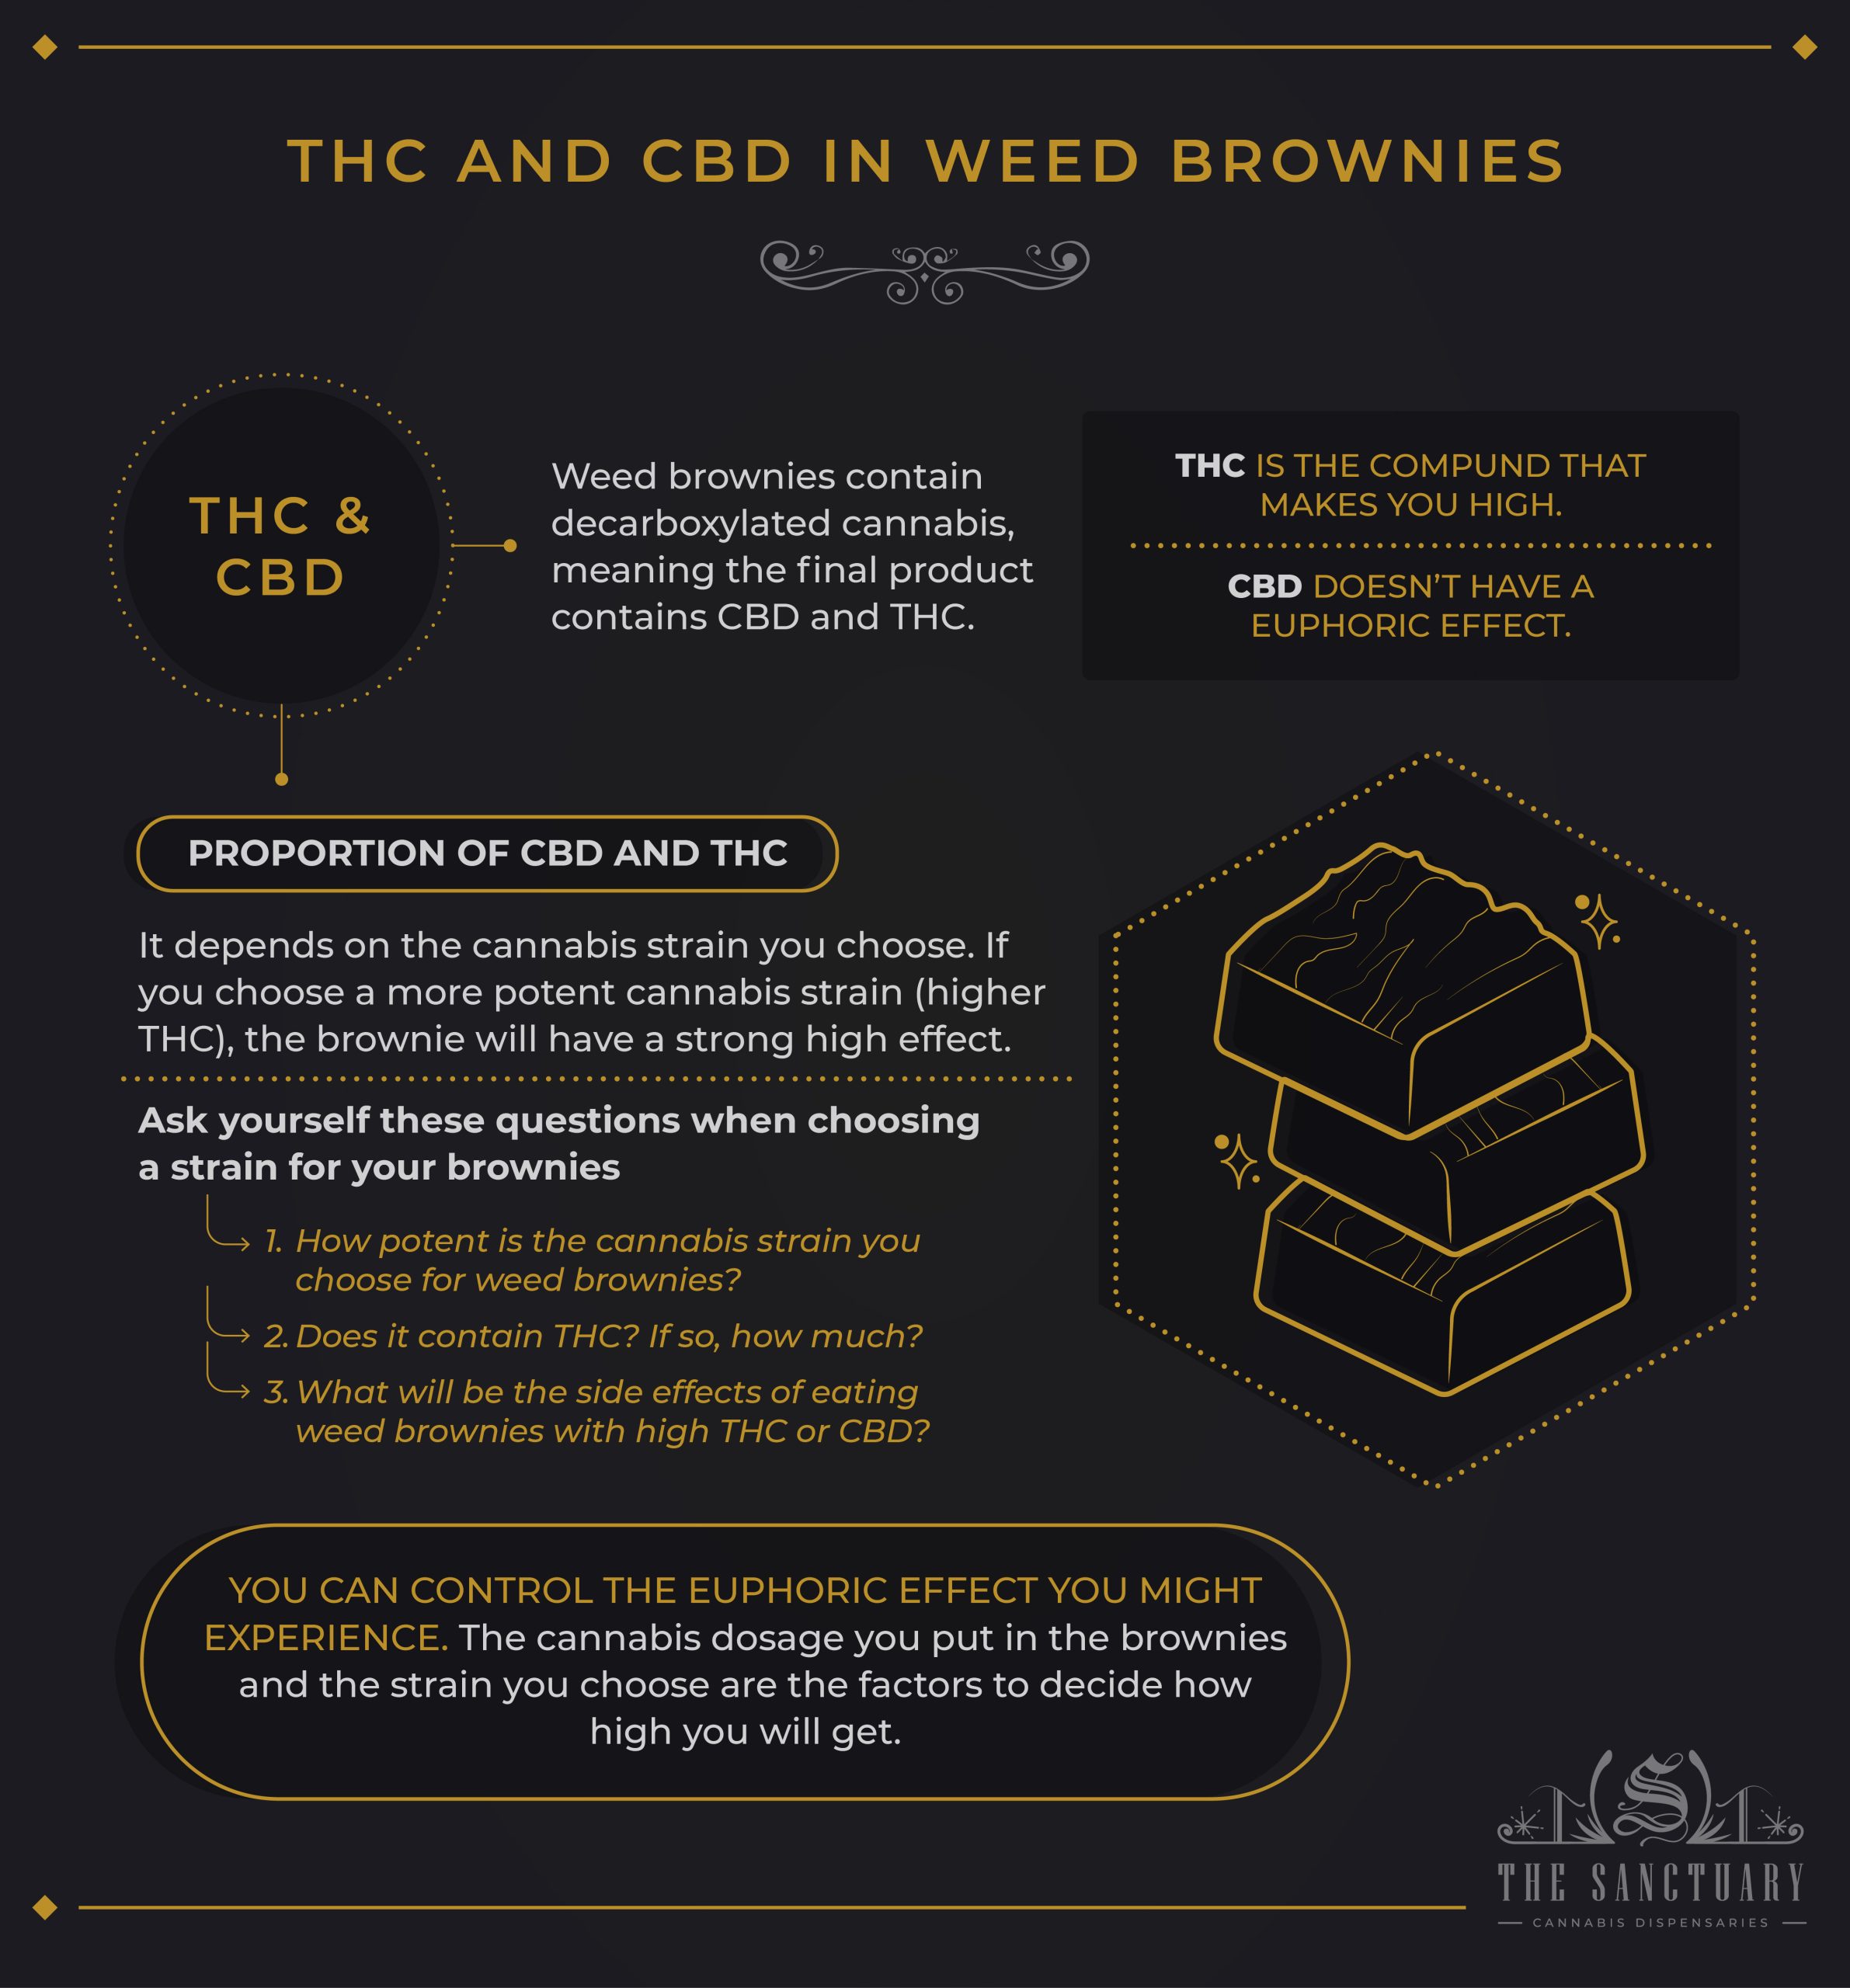 THC and CBD in Weed Brownies